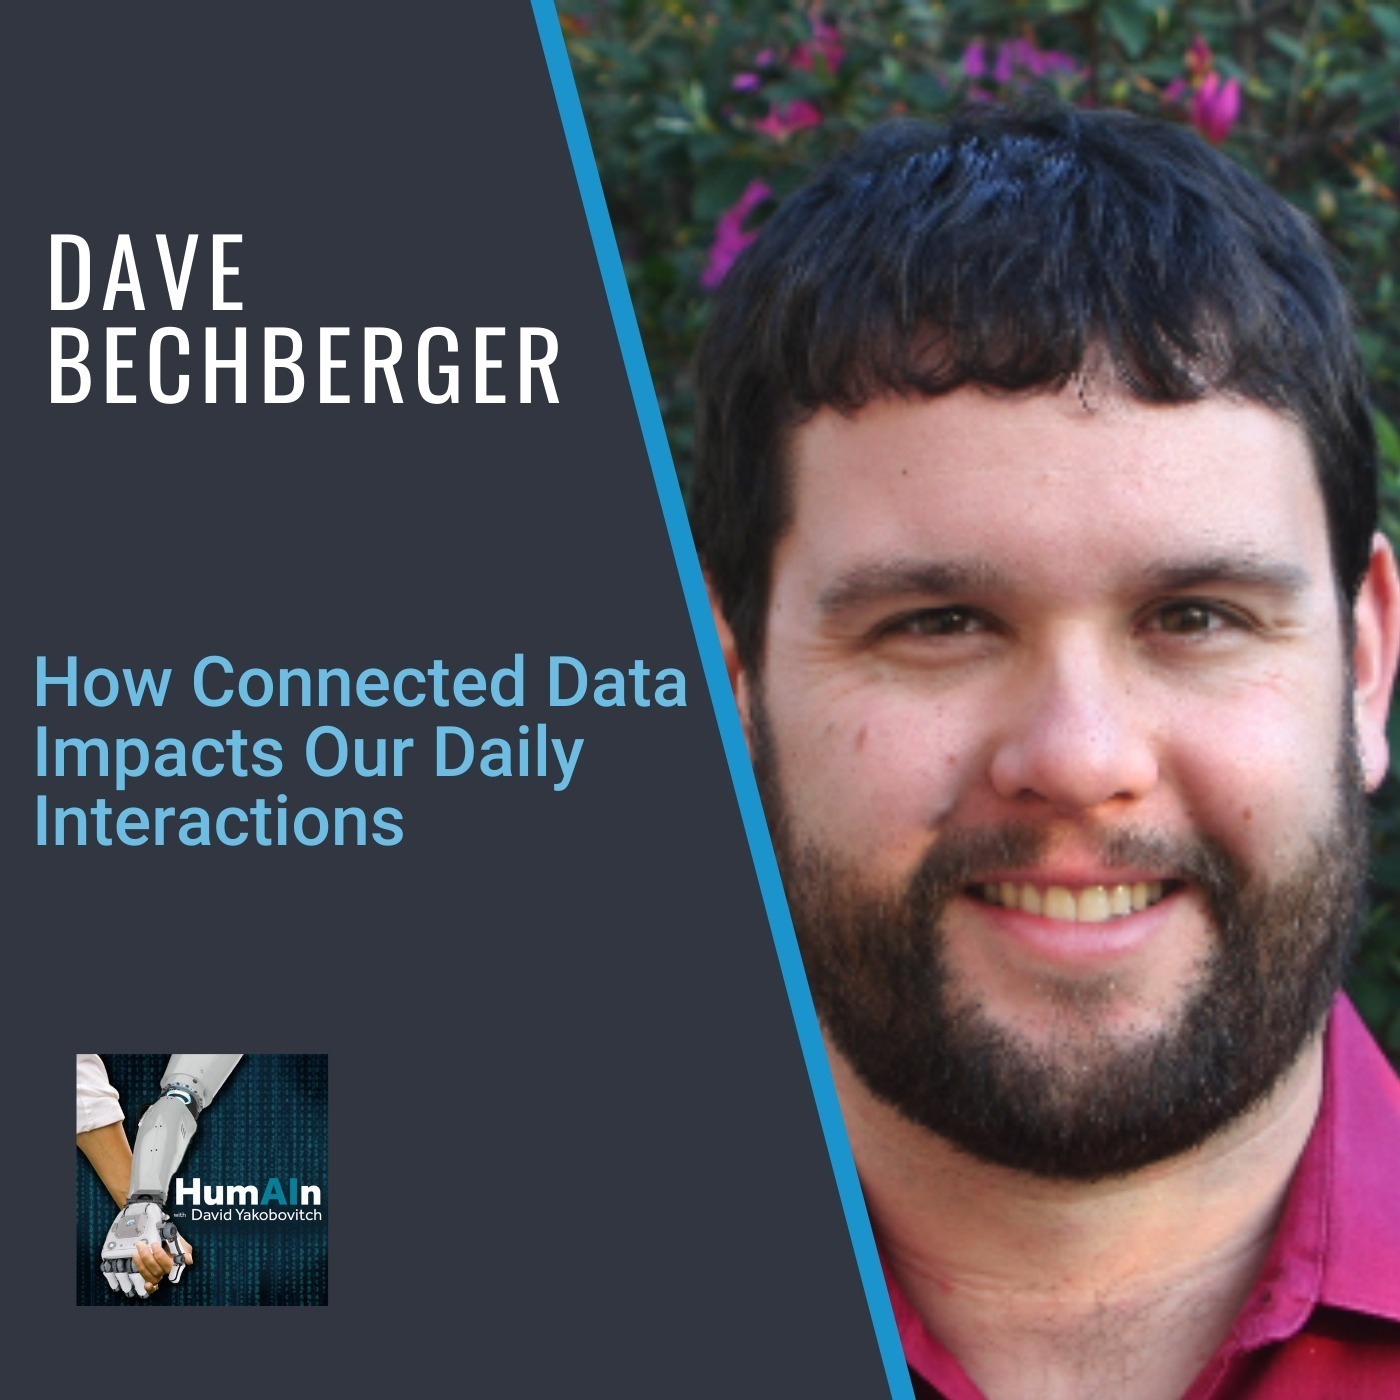 Dave Bechberger: How Connected Data Impacts Our Daily Interactions